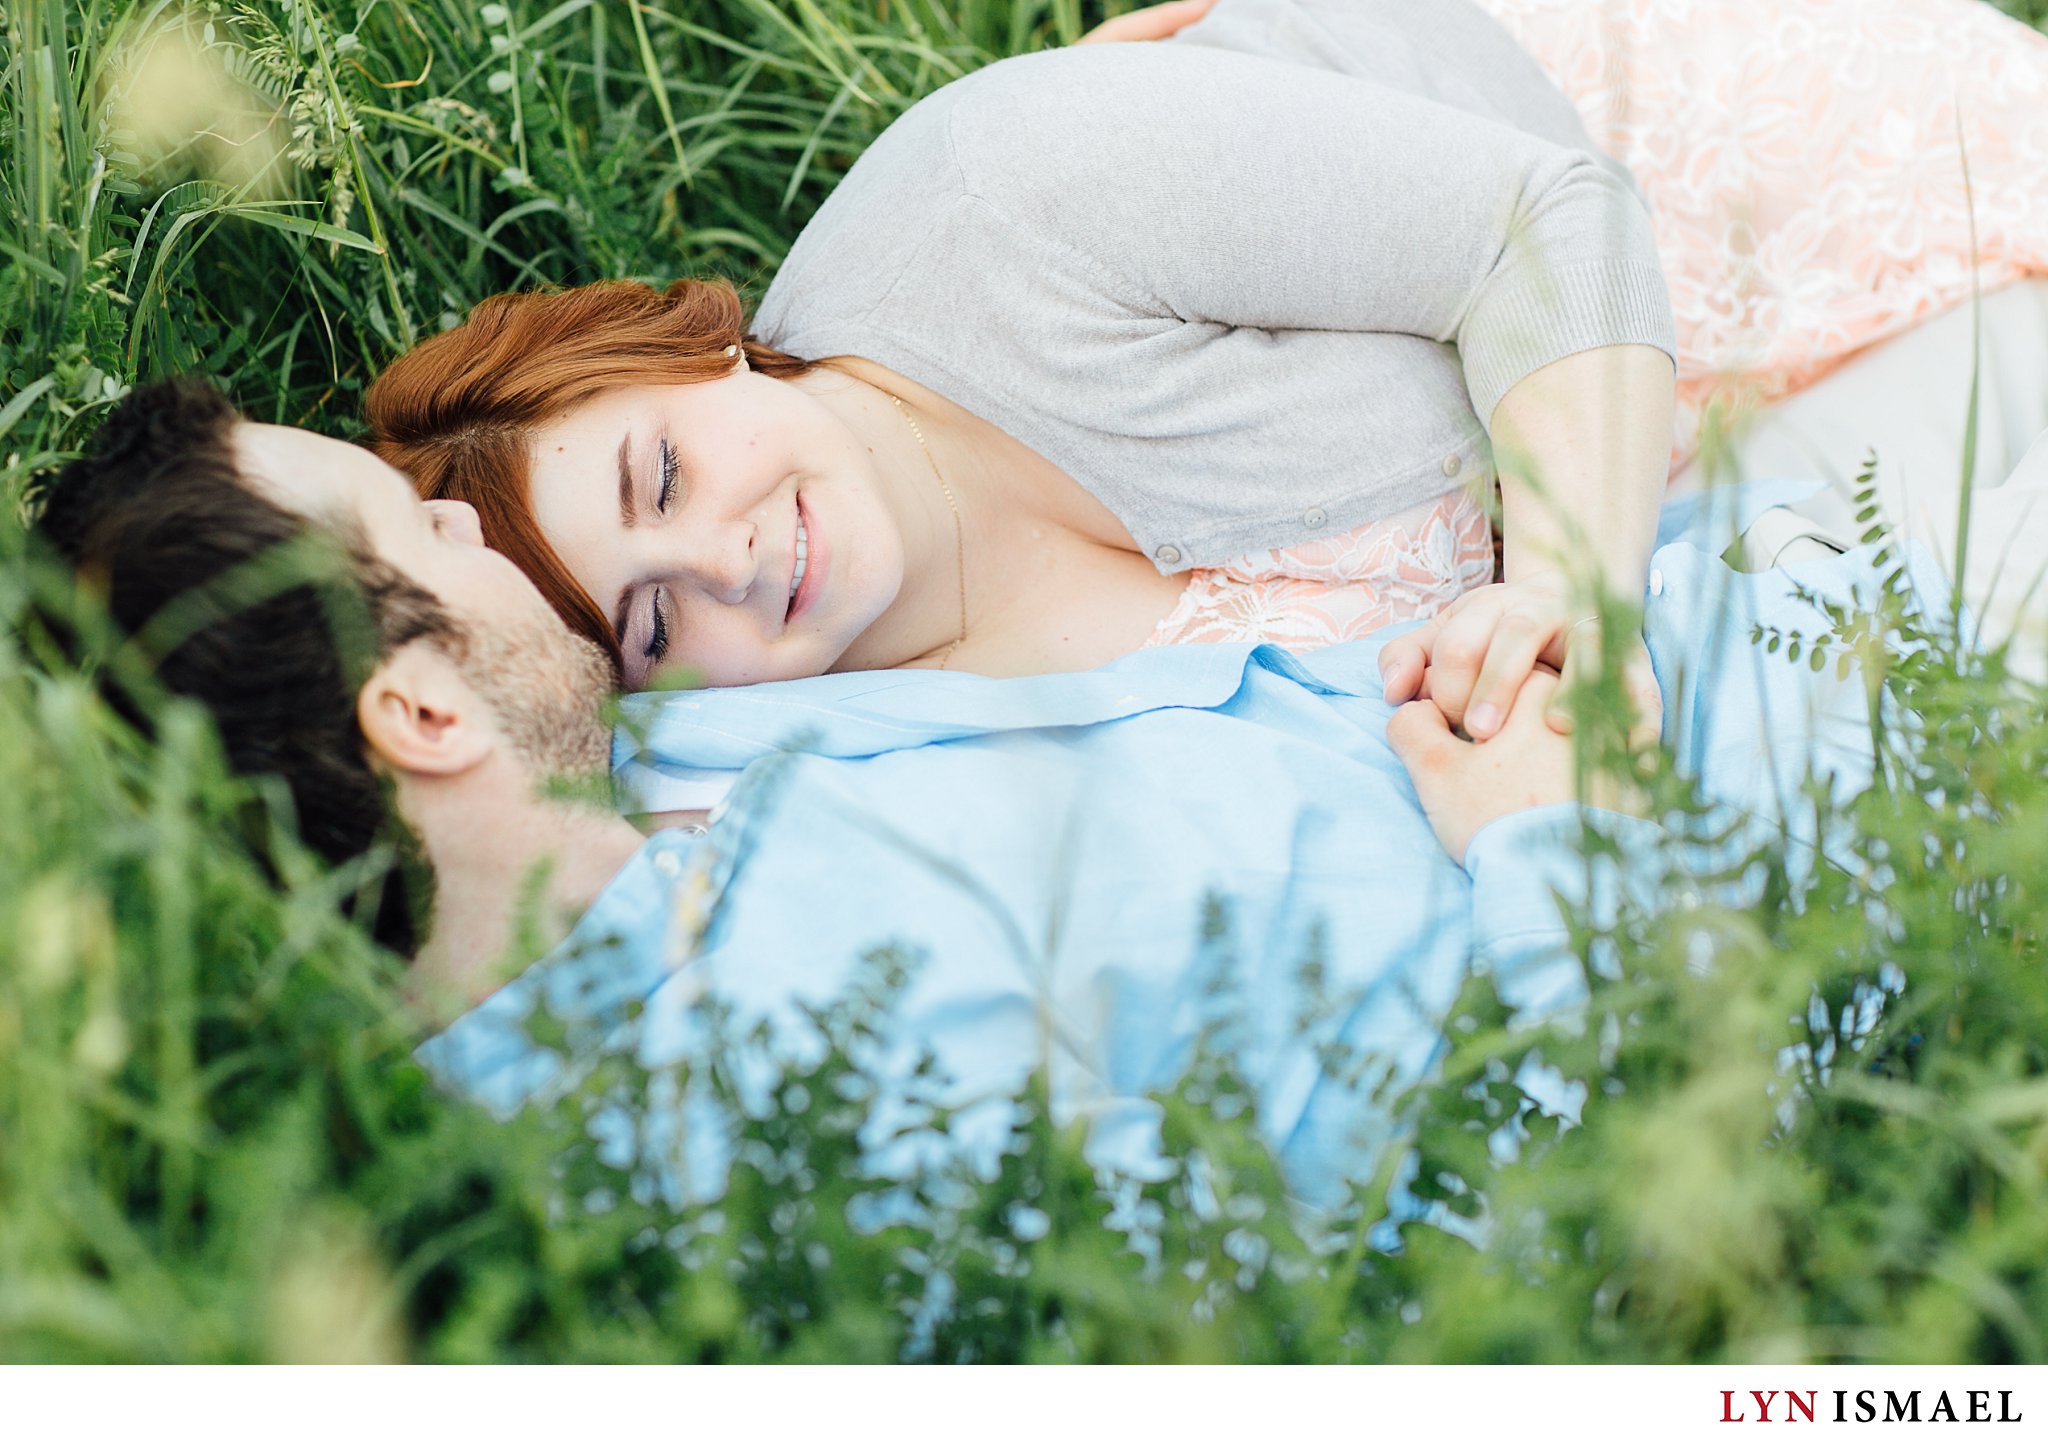 Newly engaged couple in Guelph cuddles on the grass.